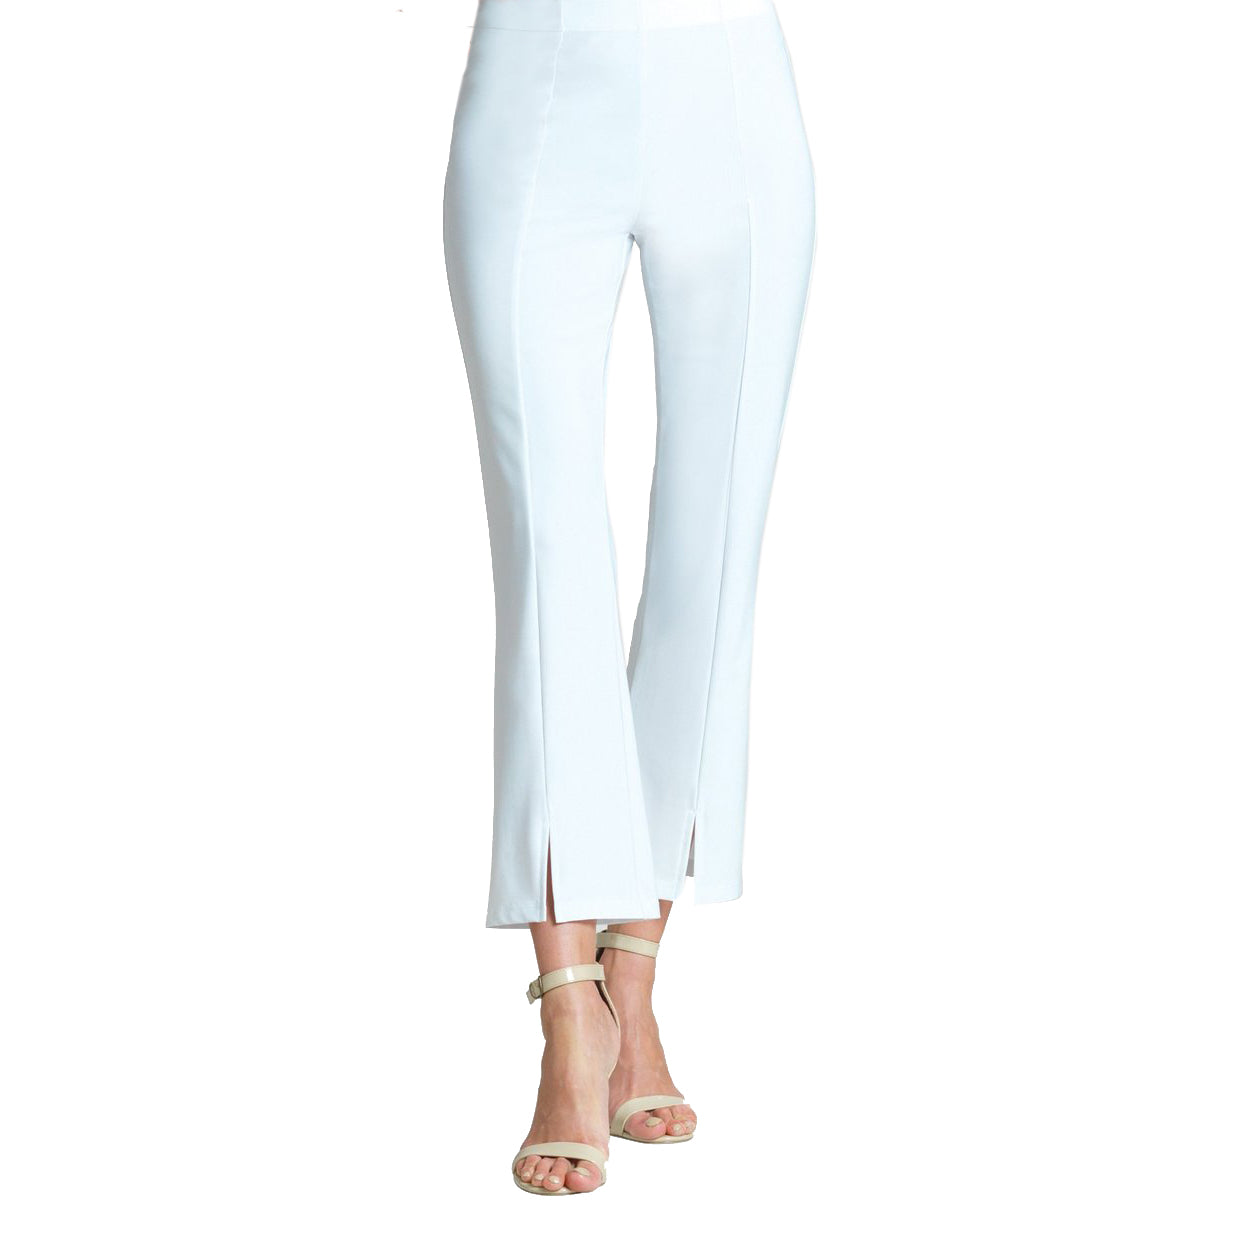 Clara Sunwoo Front Slit Ankle-Pant in White - PT4-WHT - Size S Only ...